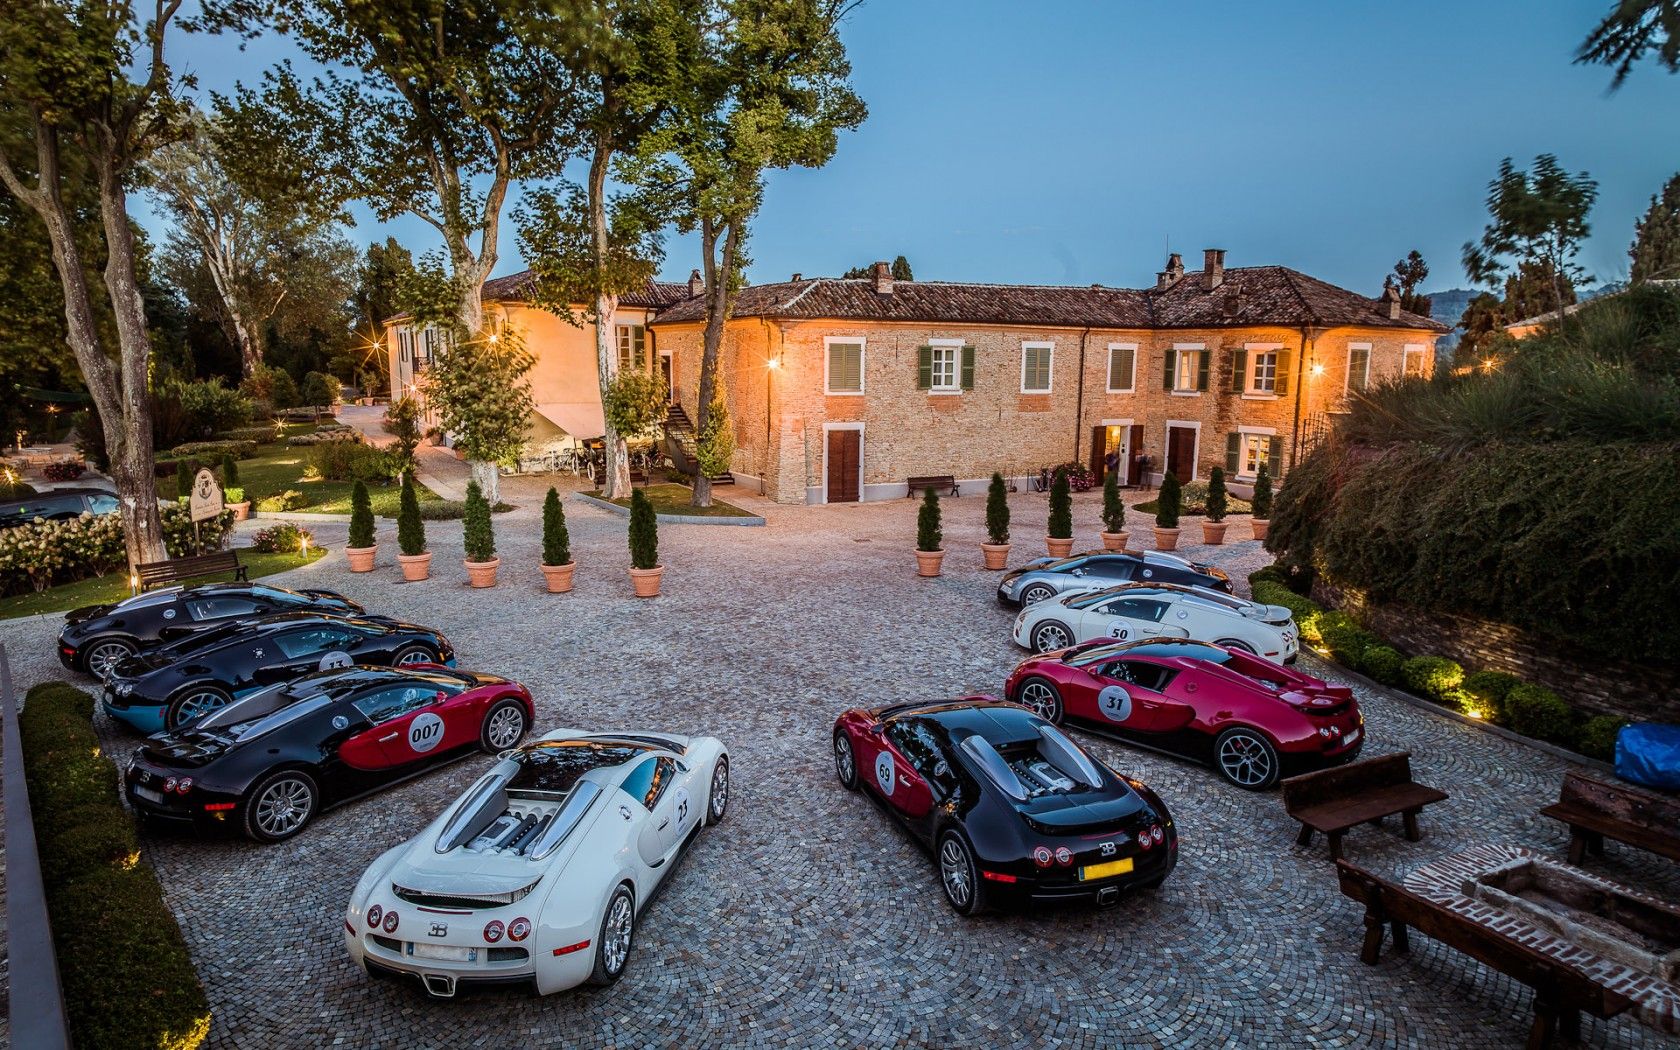 Dream Home, Luxury House, Success - Mansion Driveway With Cars - HD Wallpaper 